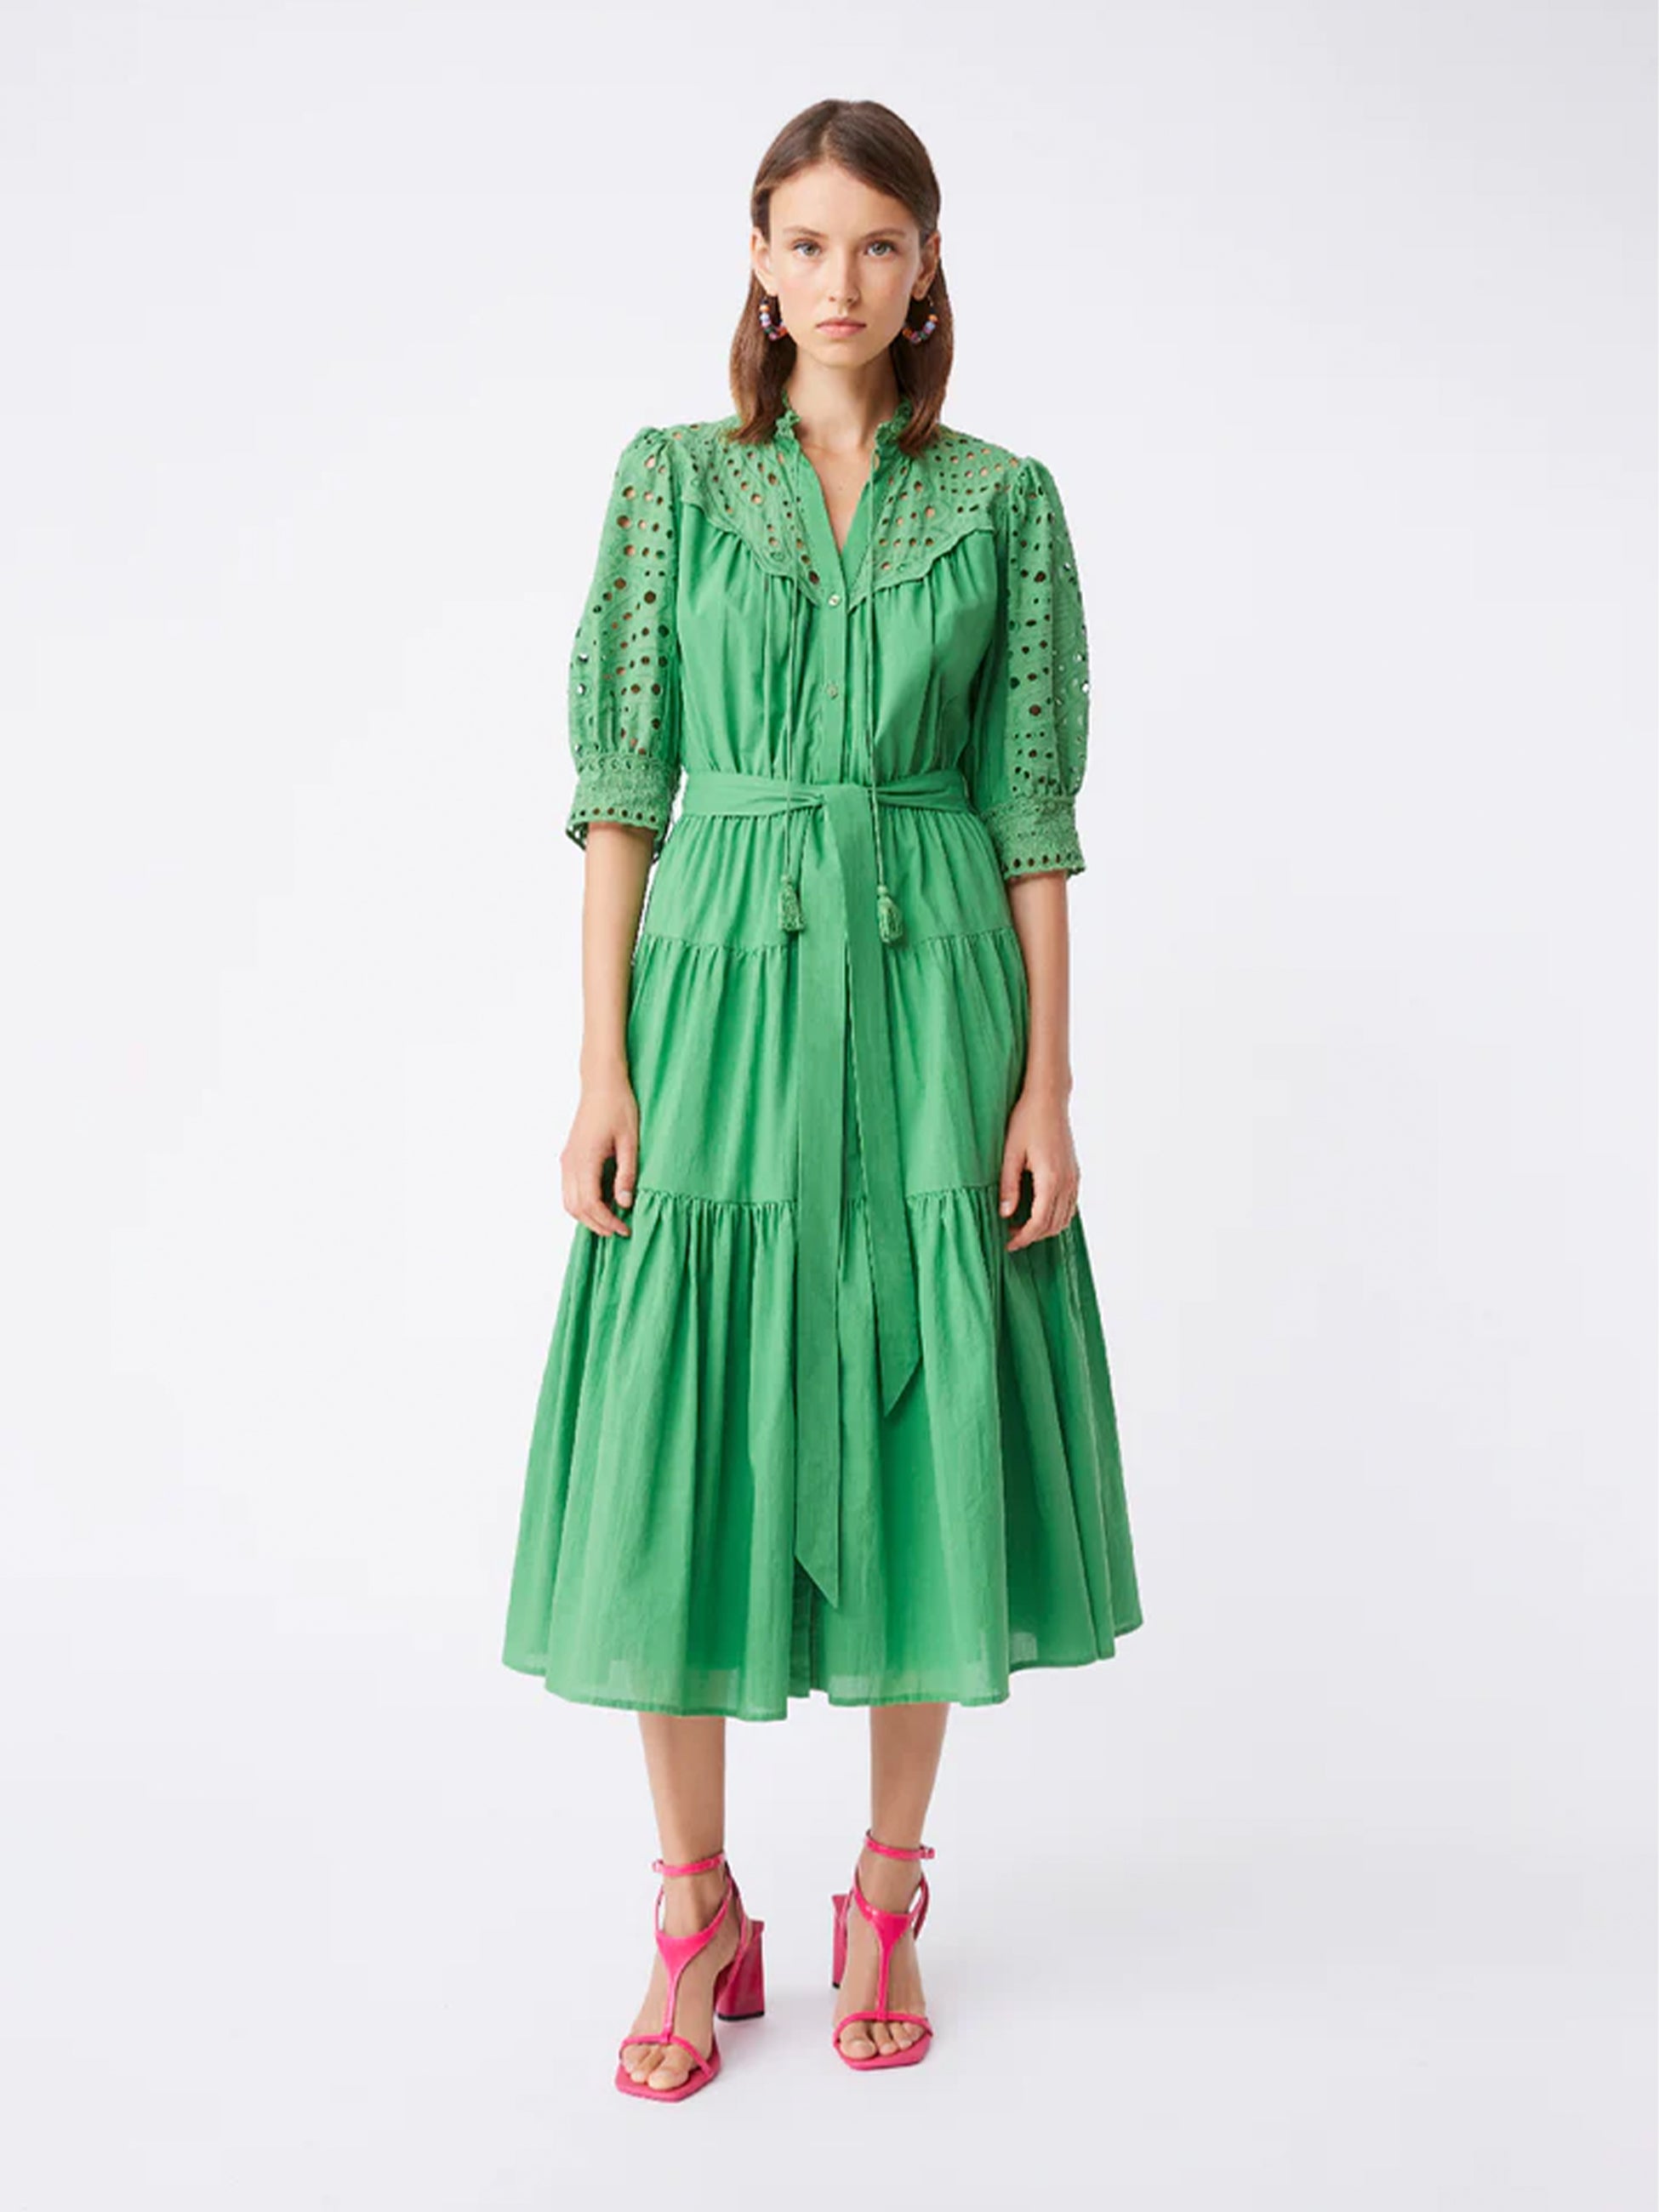 Cora Woven Embroidered Dress